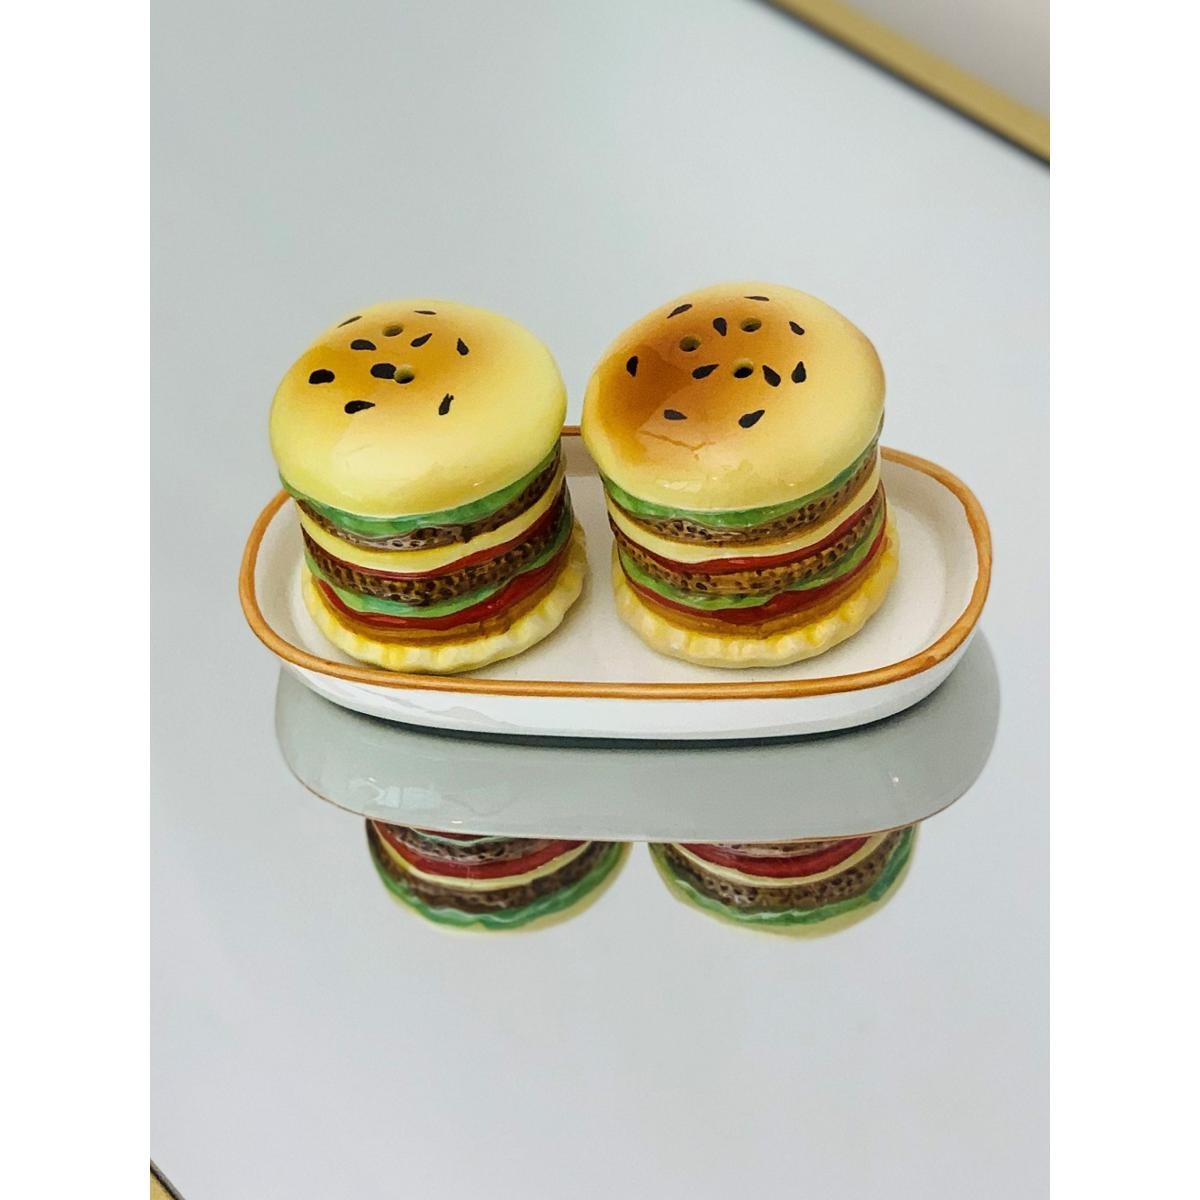 Burger Shape Salt and Pepper shaker with Tray (2 Piece Set)